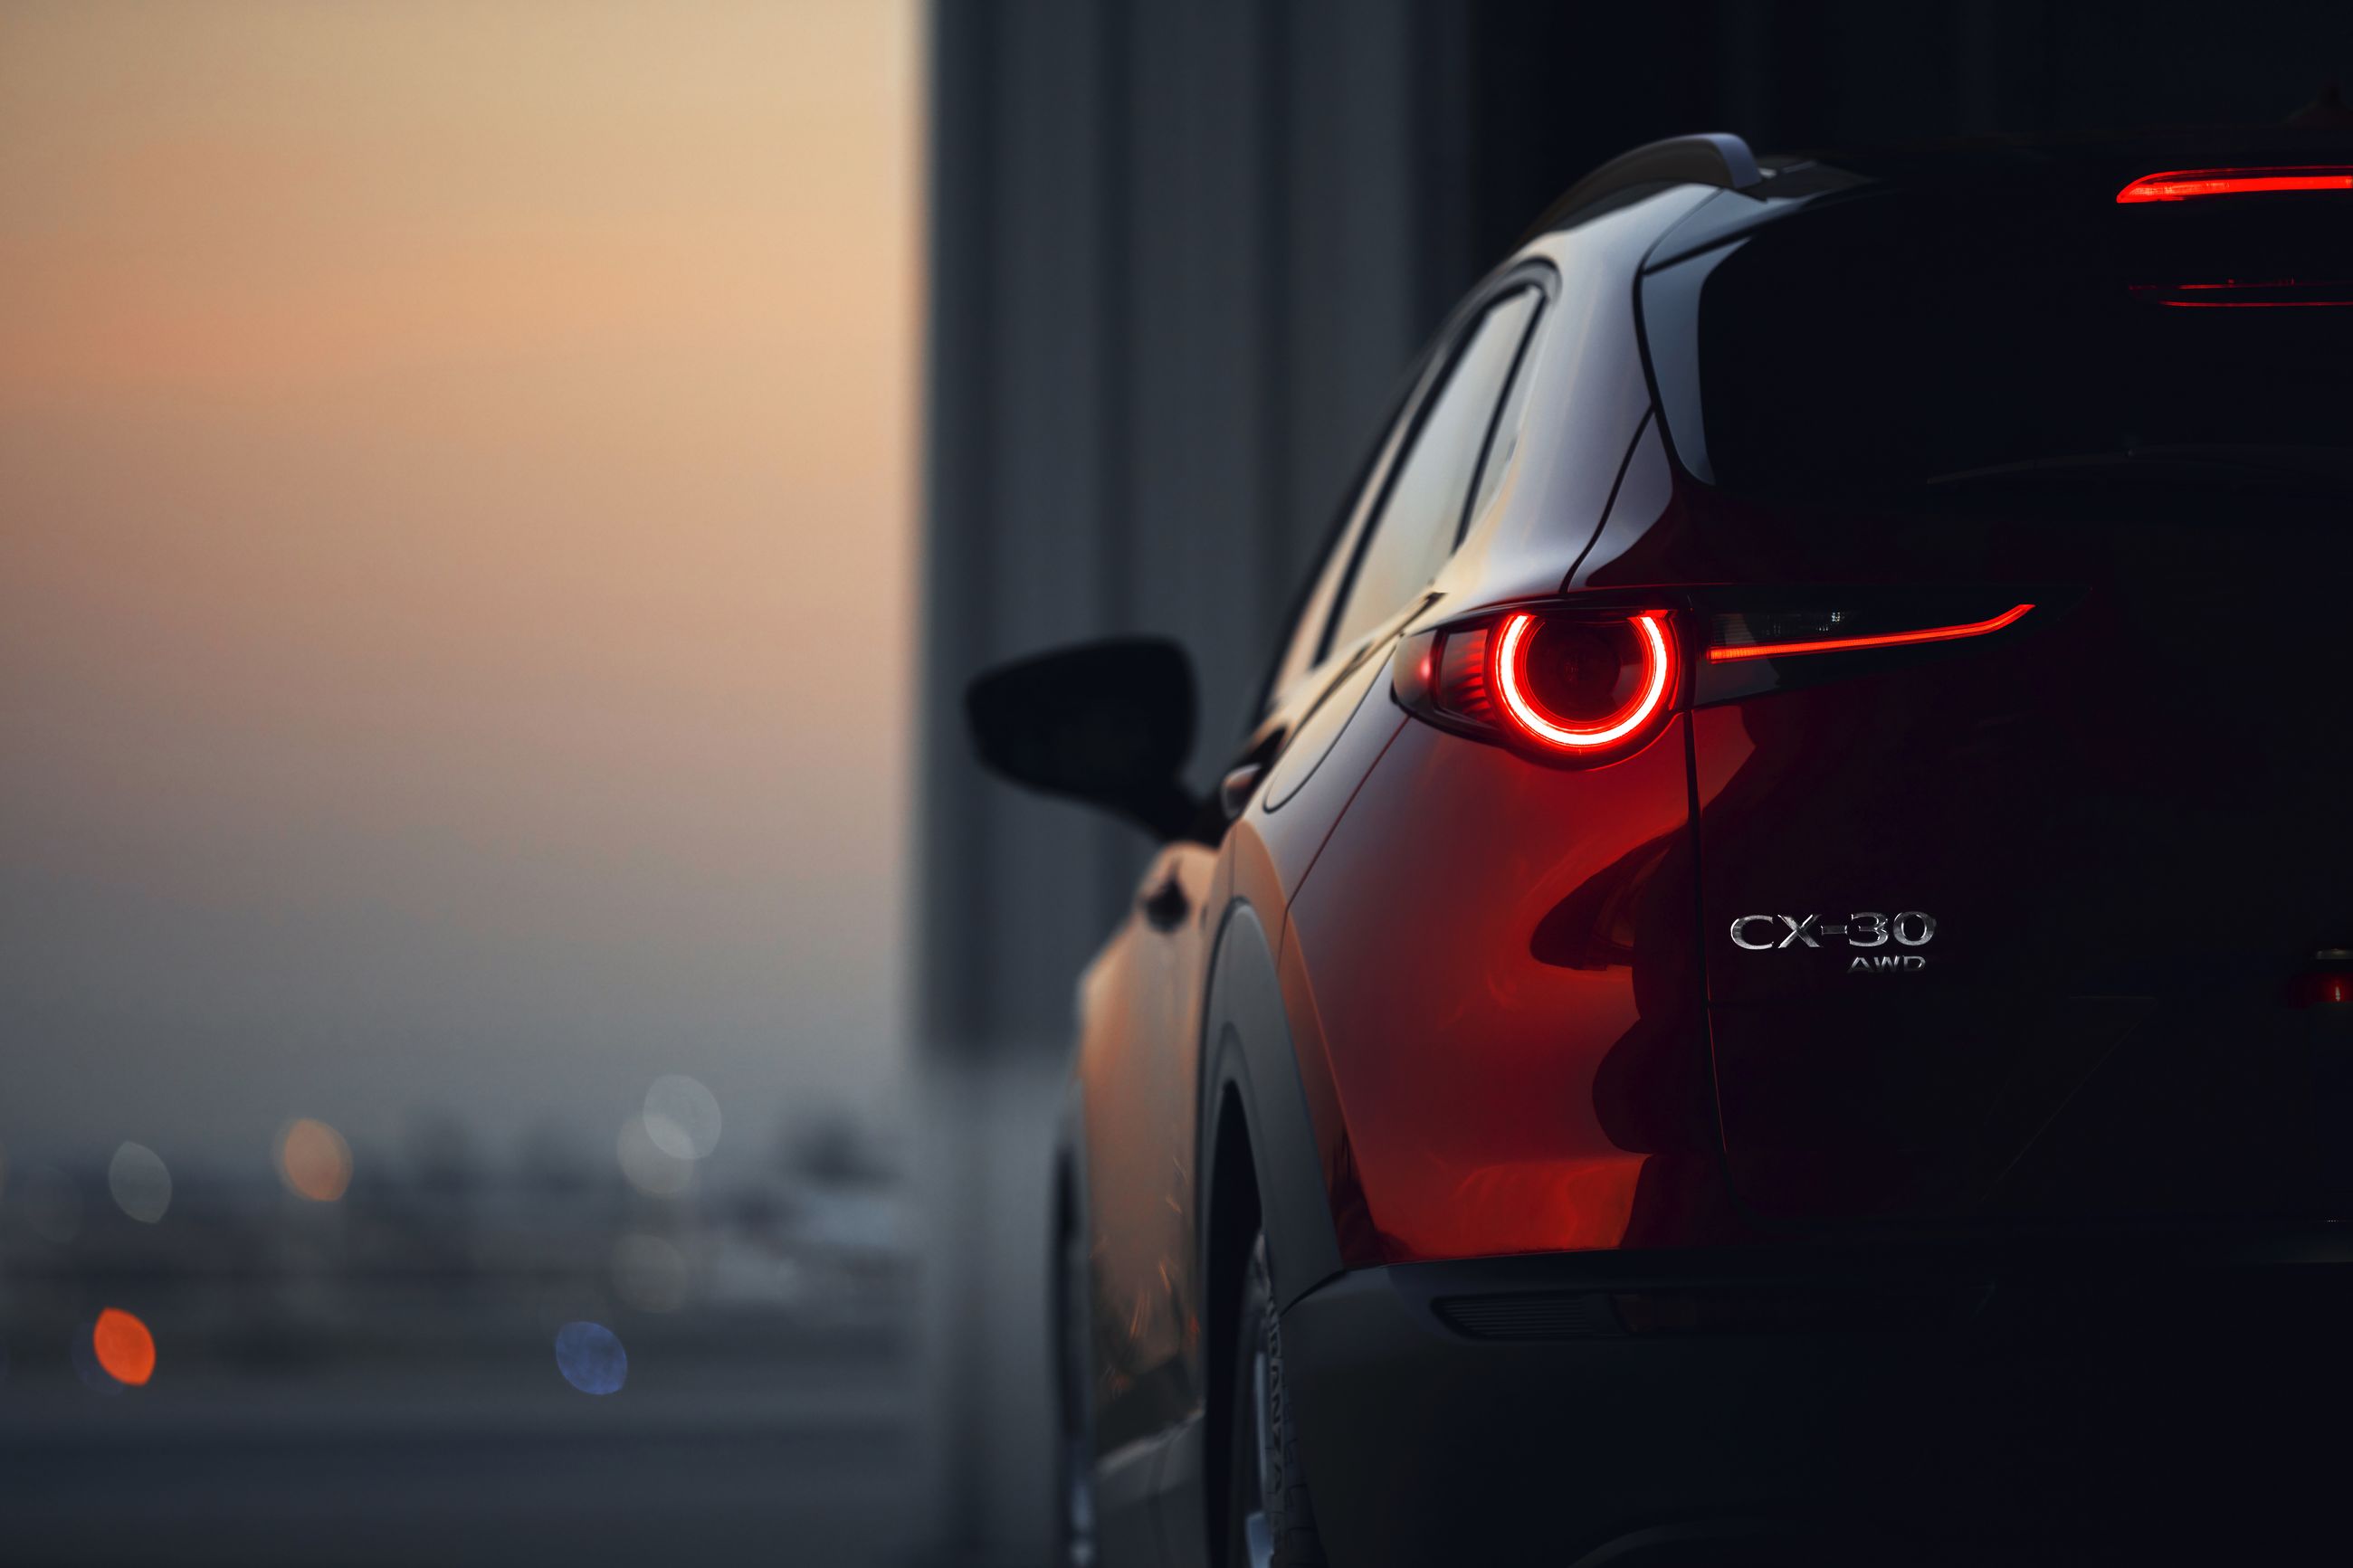 2020 Mazda CX-30 - Safety First! All About Mazda's i-Activsense Safety Features!